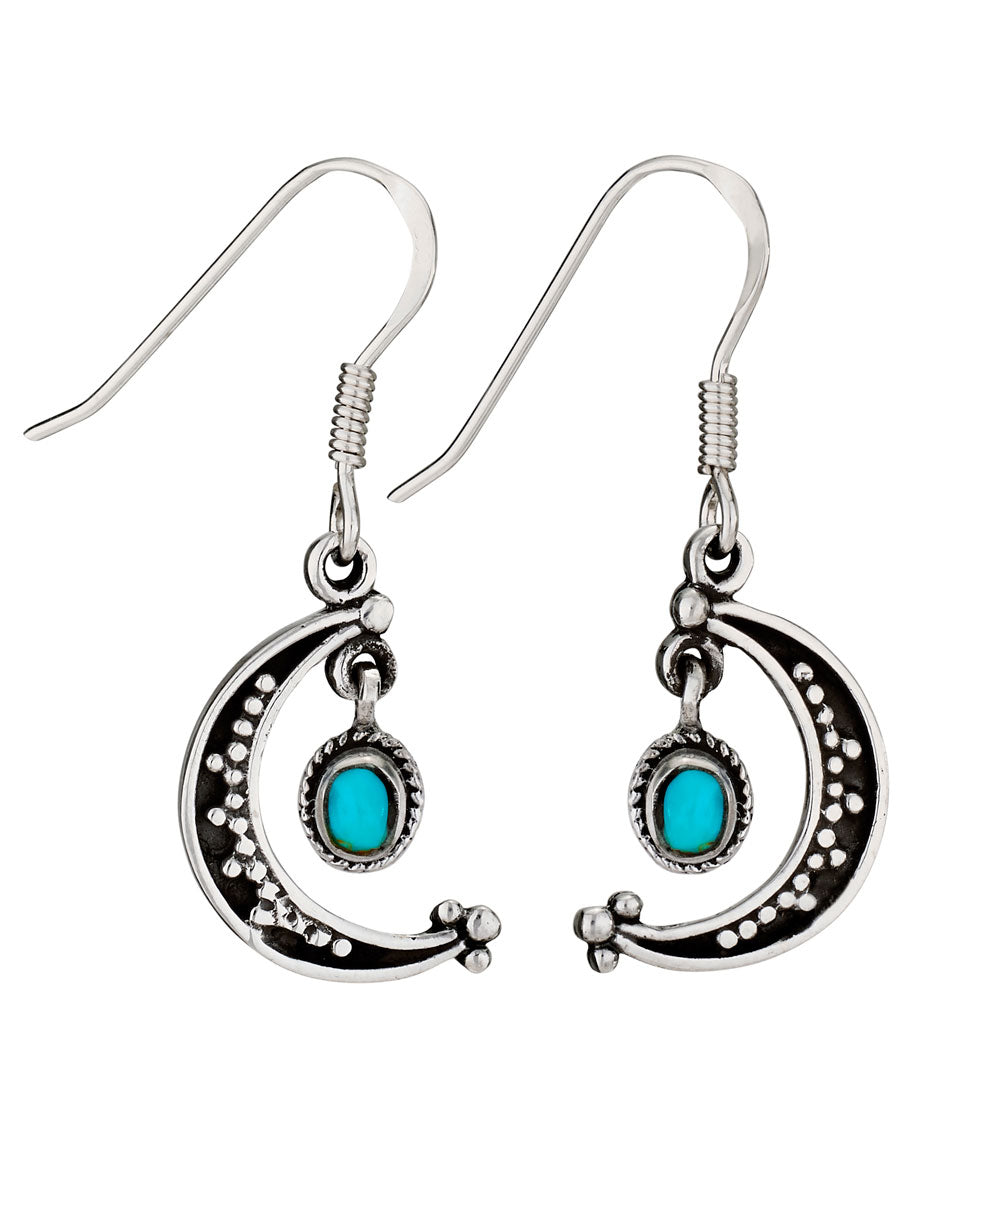 Turquoise Crescent Moon Earrings